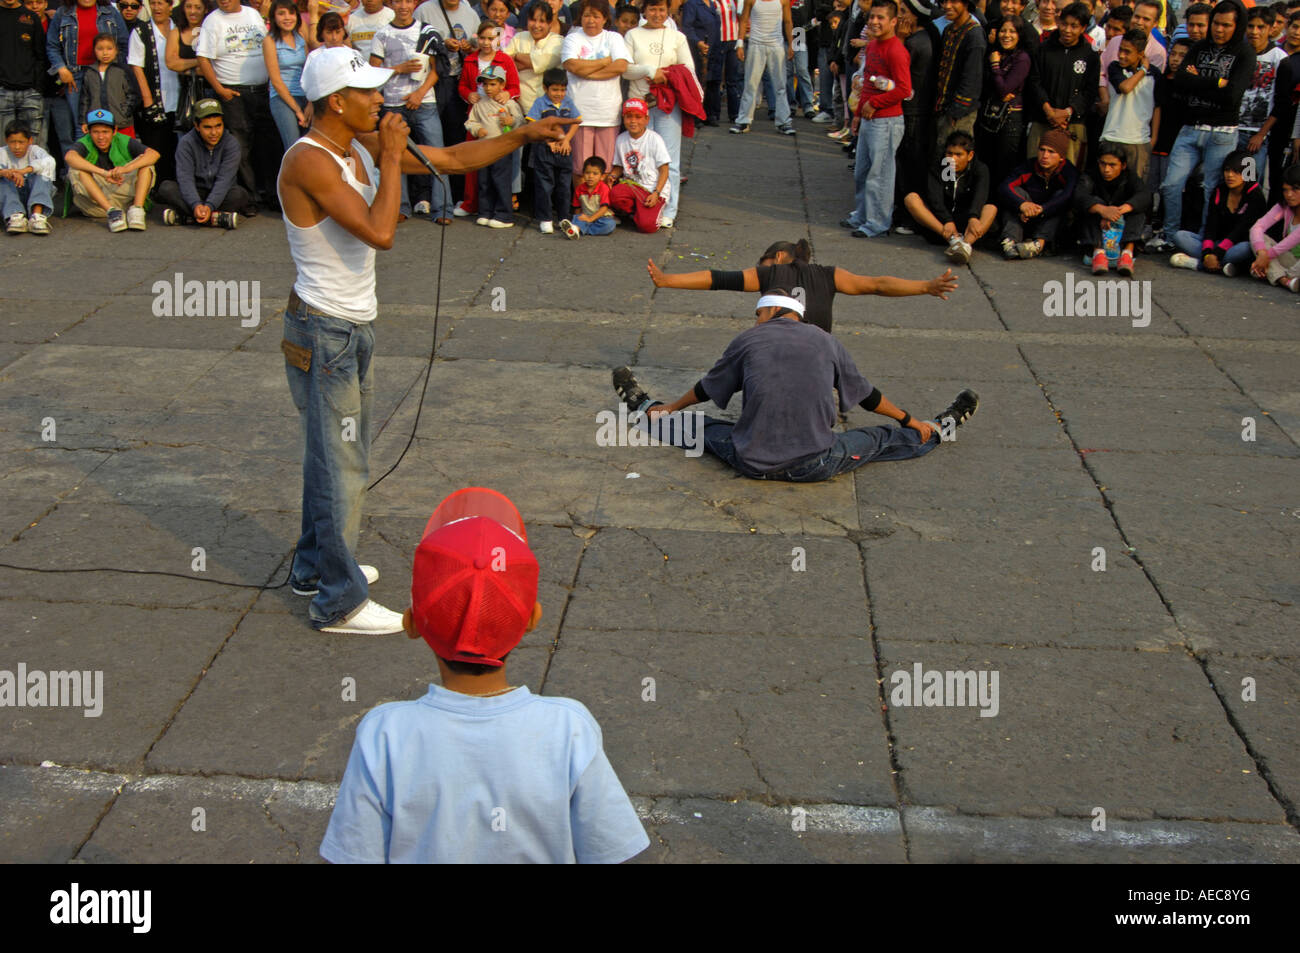 Popular entertainment for crowds that gather in the Zocalo of Mexico City Stock Photo